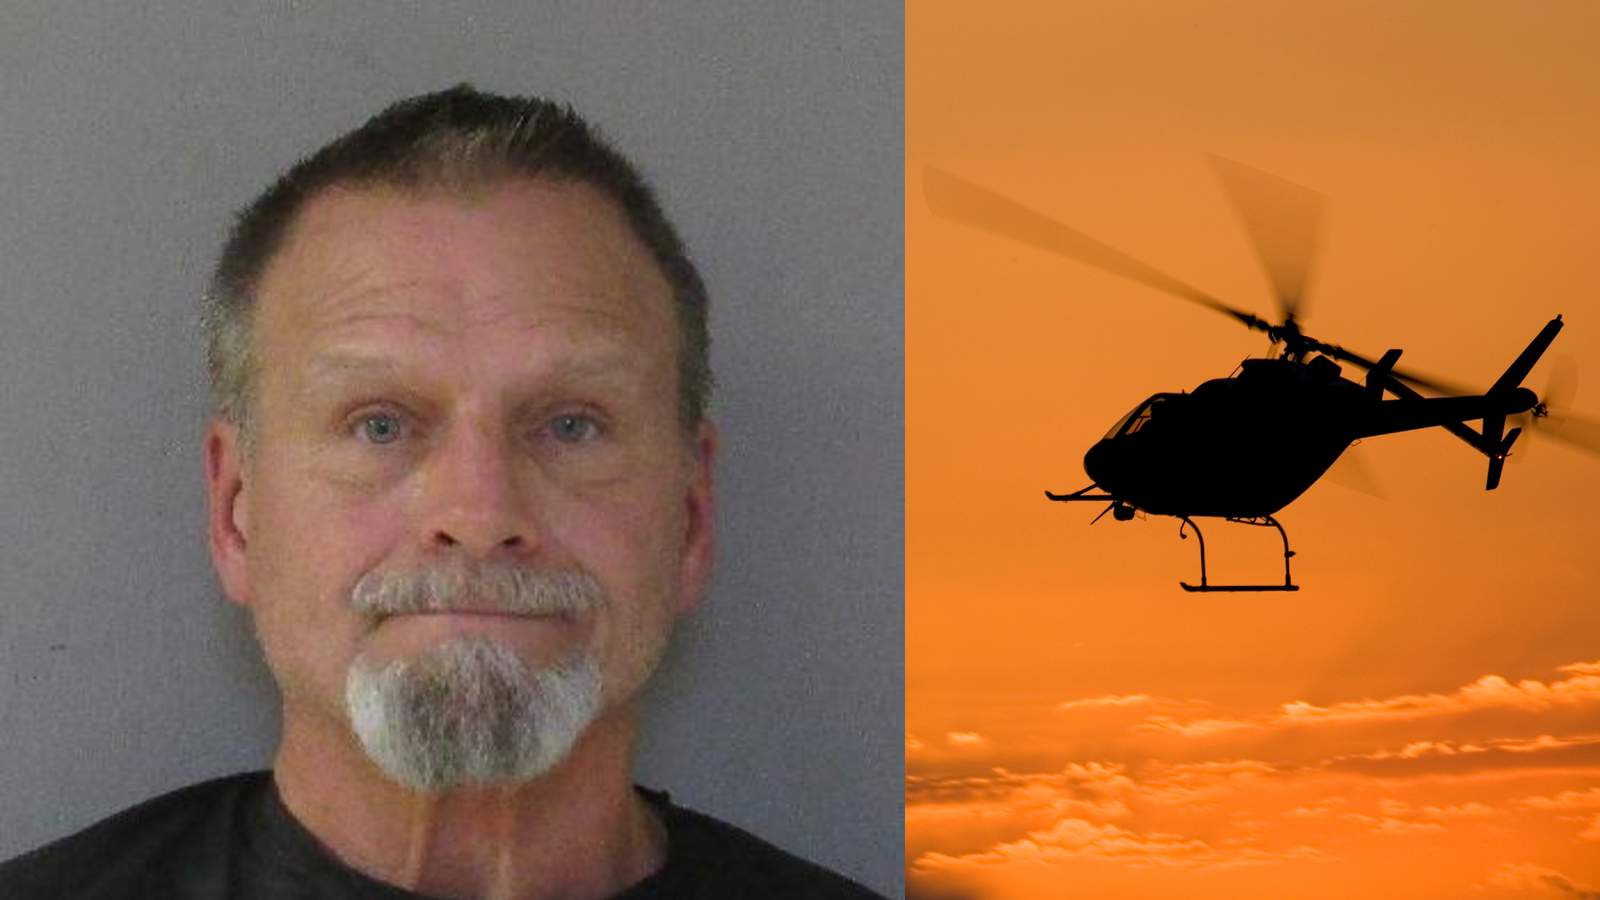 Another Florida man accused of shining laser at Volusia sheriff’s helicopter